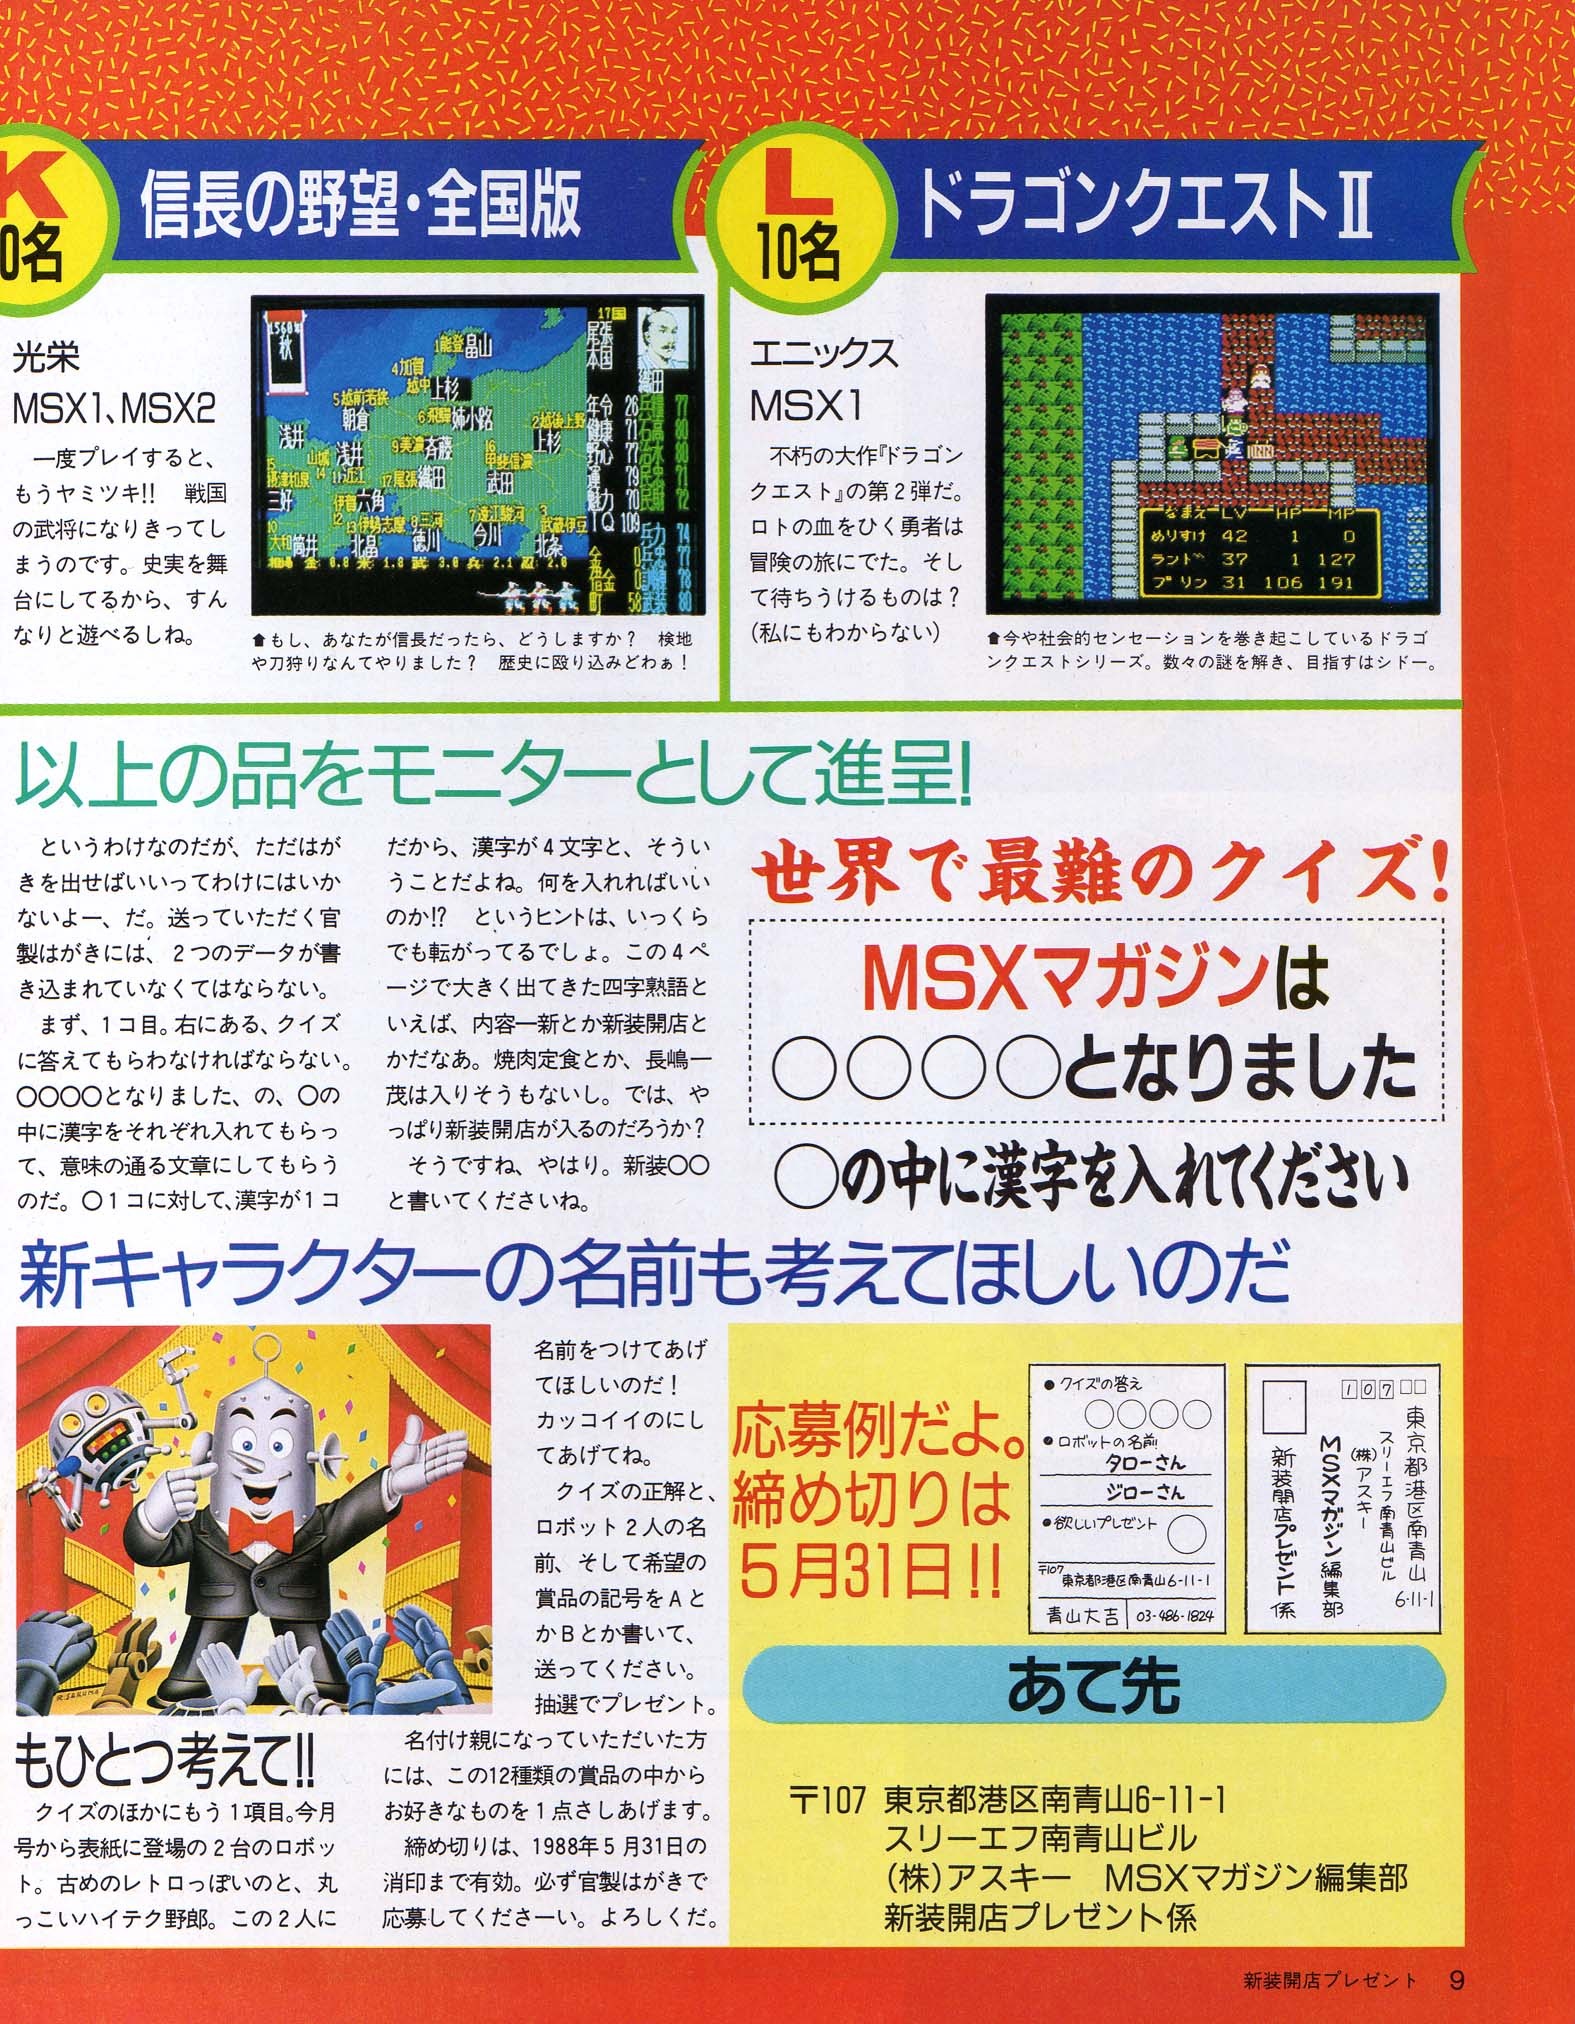 MSX Magazine 1988 to 1992 issues to download | GamePlayerSpecial